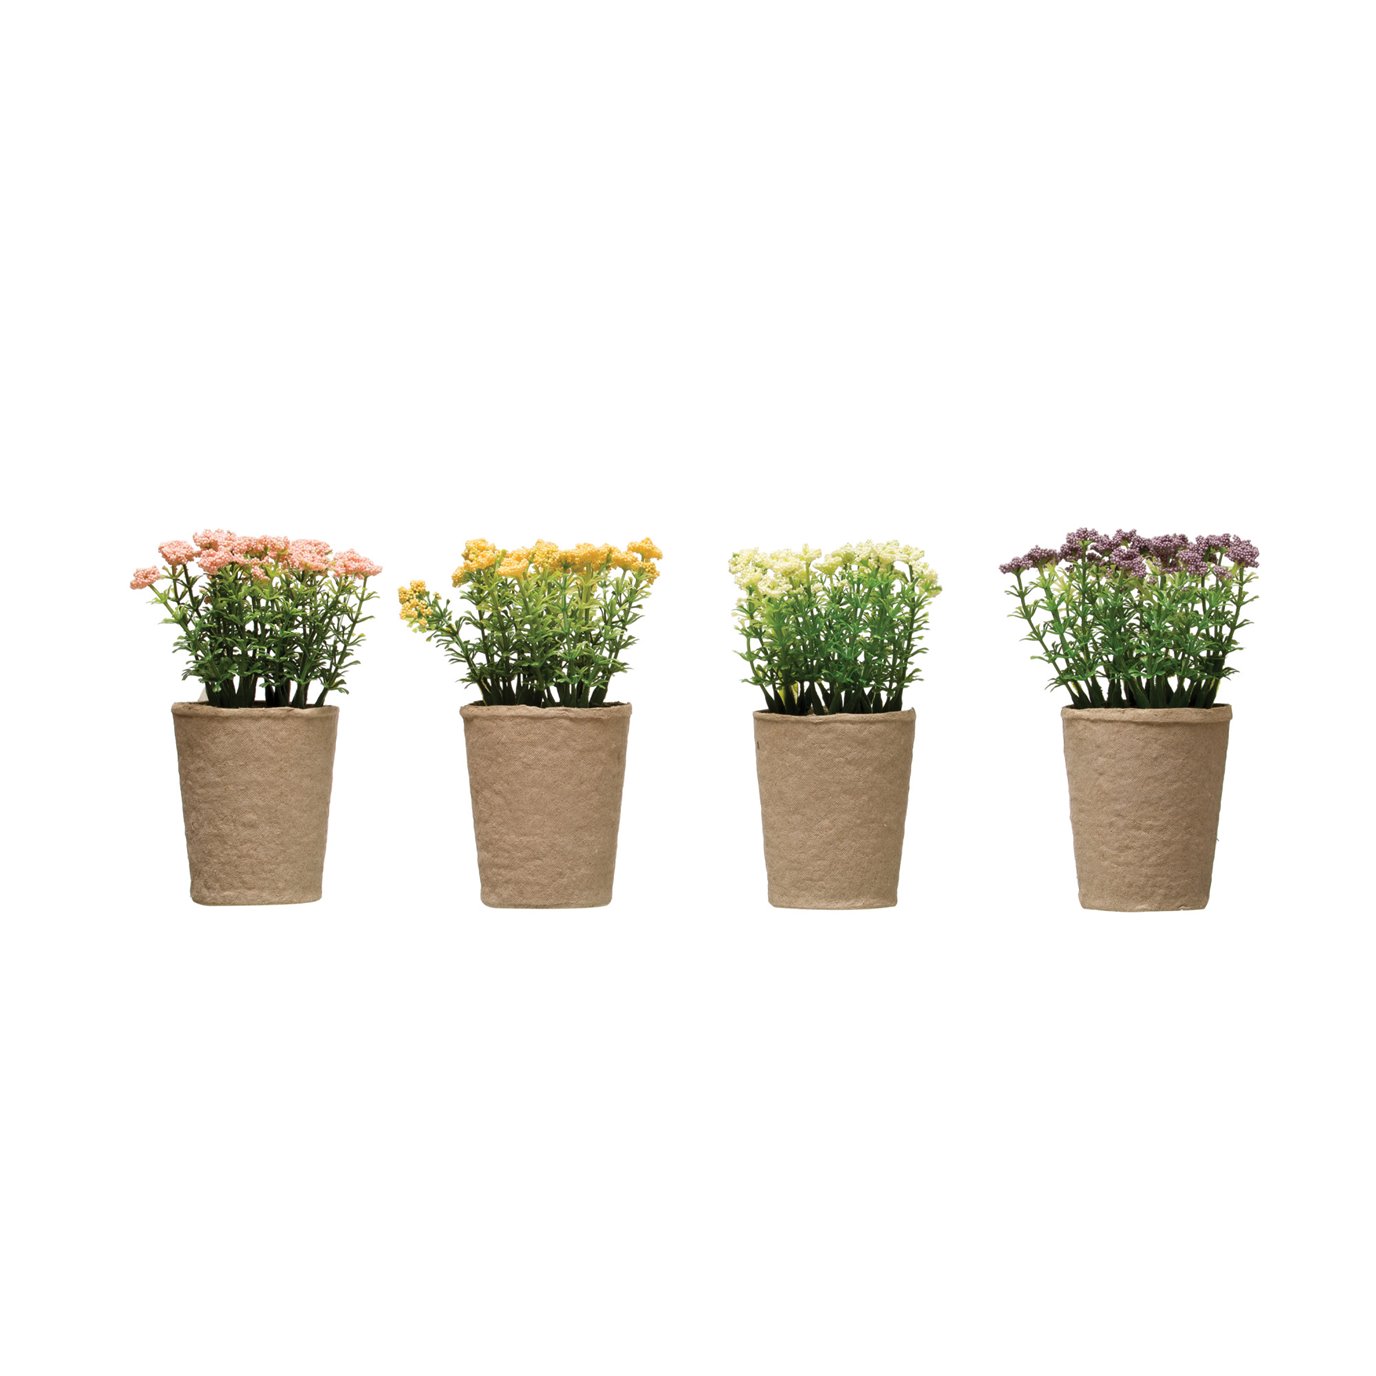 4" Round x 6-1/2"H Faux Blooming Plant in Paper Pot (Set of 4 Colors)